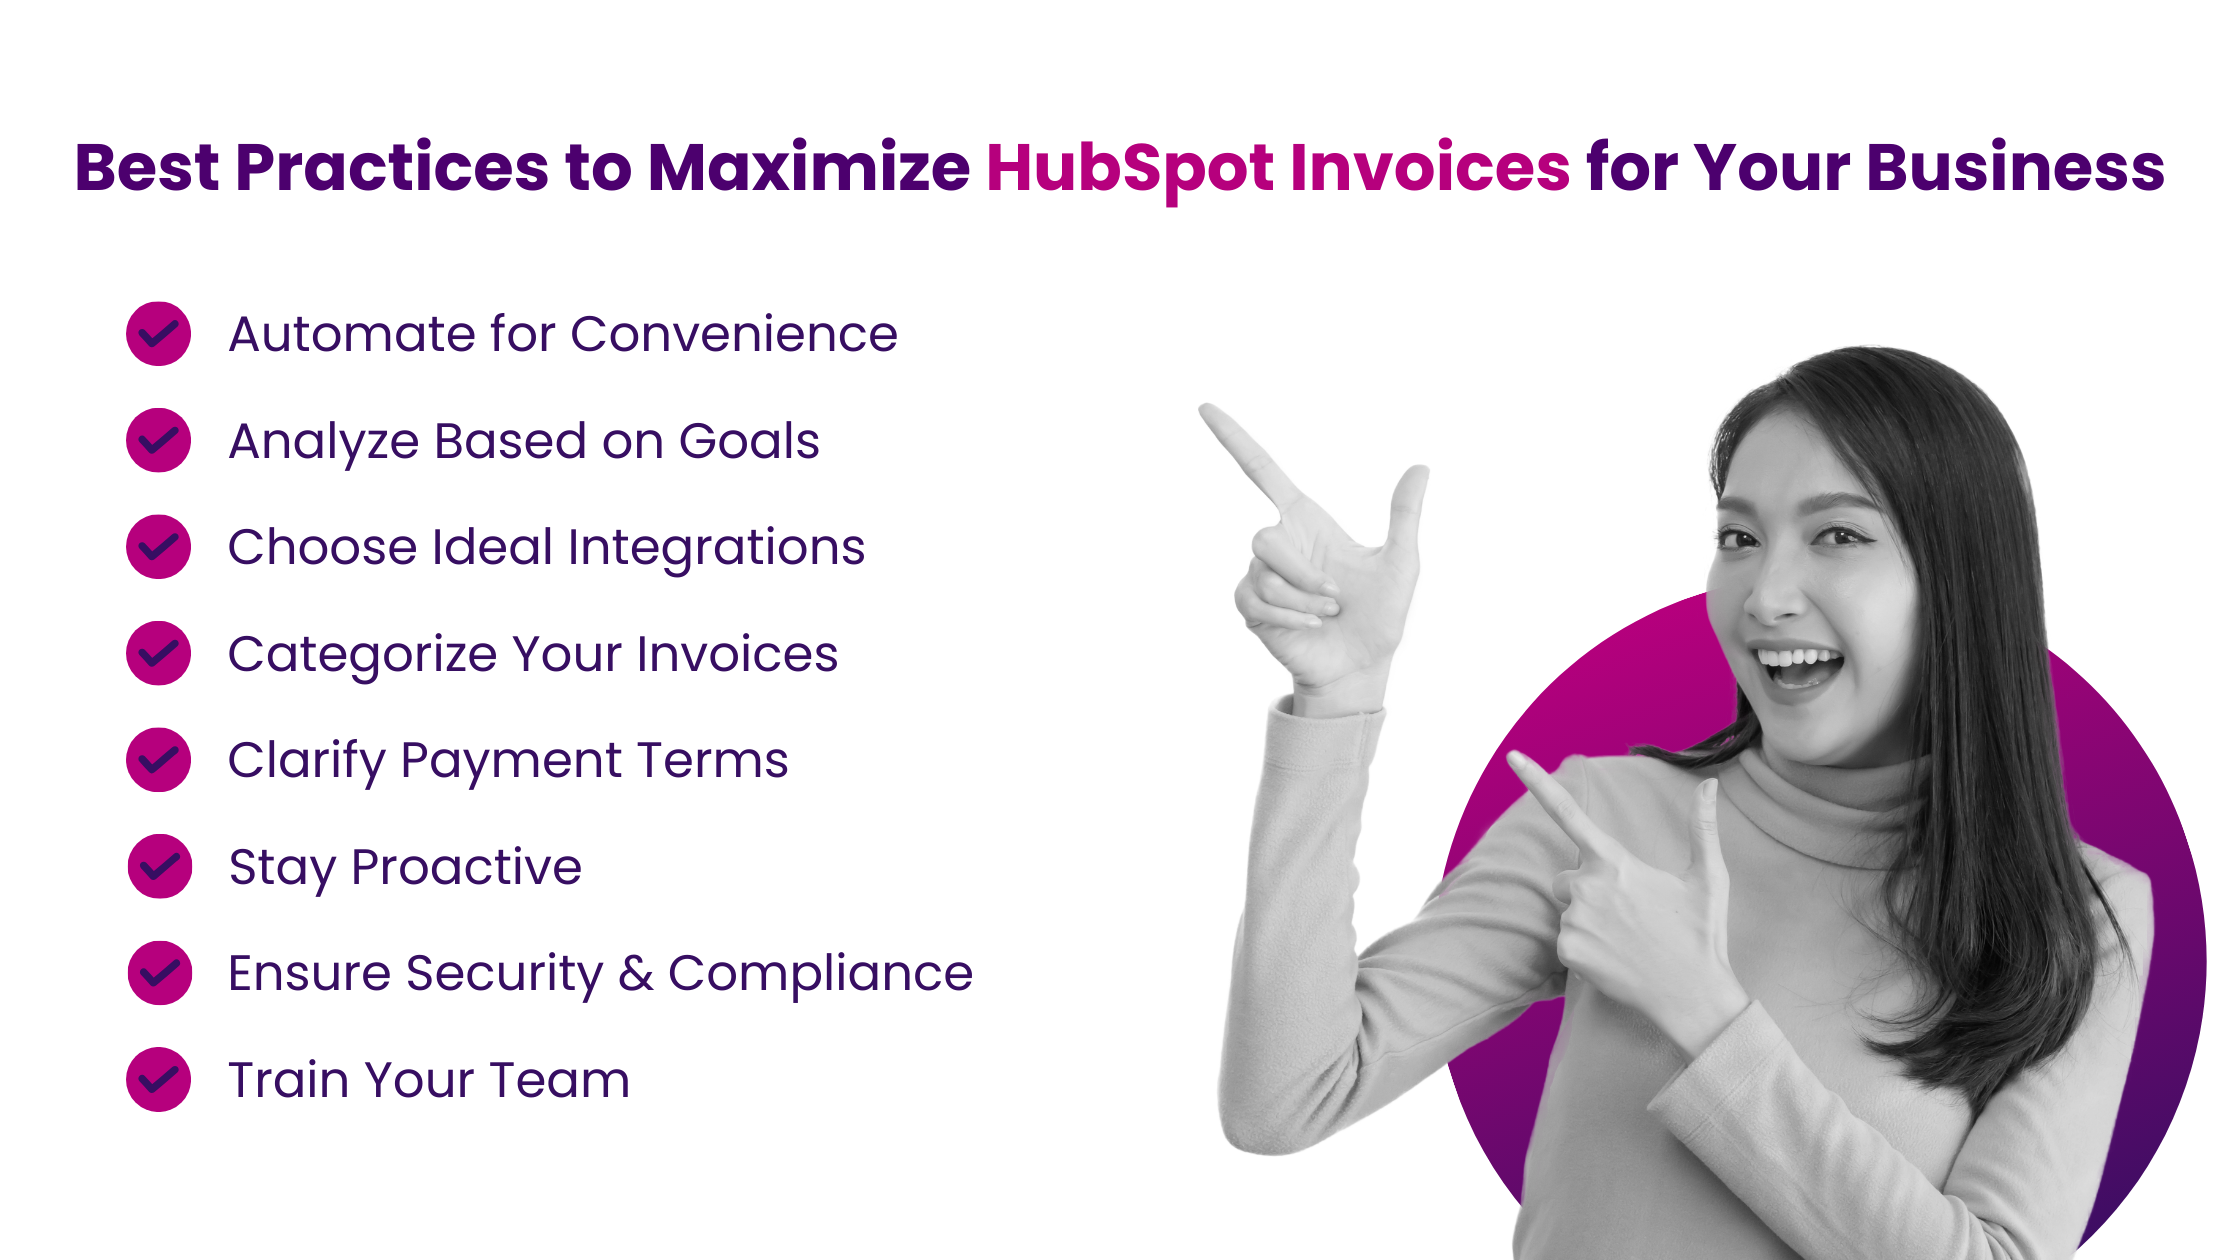 Best Practices to Maximize HubSpot Invoice for Your Business